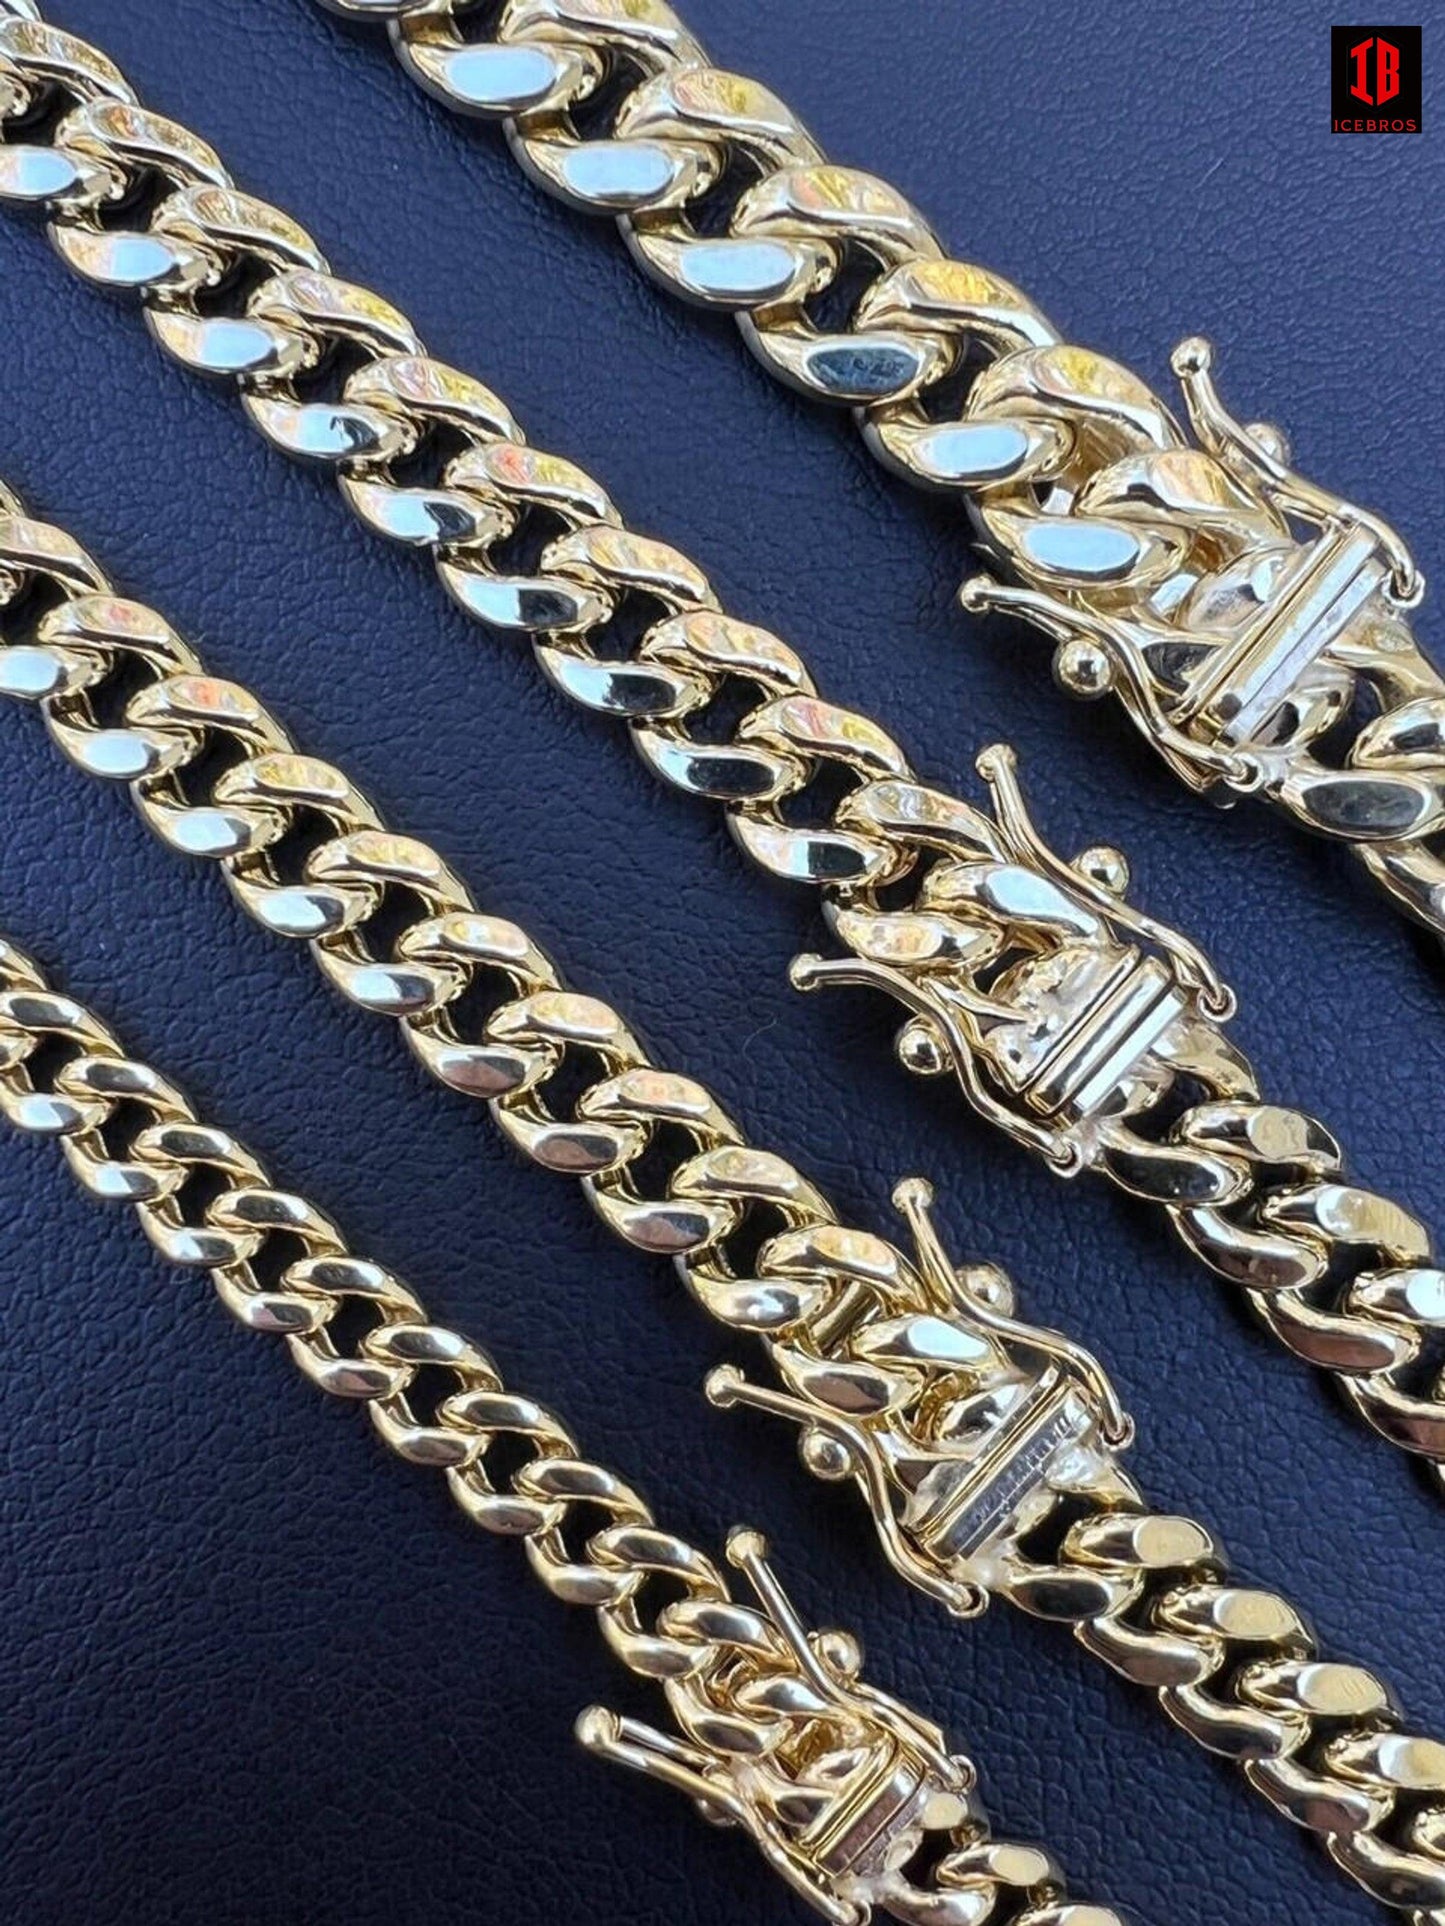 10k HOLLOW SOLID Yellow Gold Miami Cuban Link Chain Necklace 4.5-7mm 18-26" Box Lock